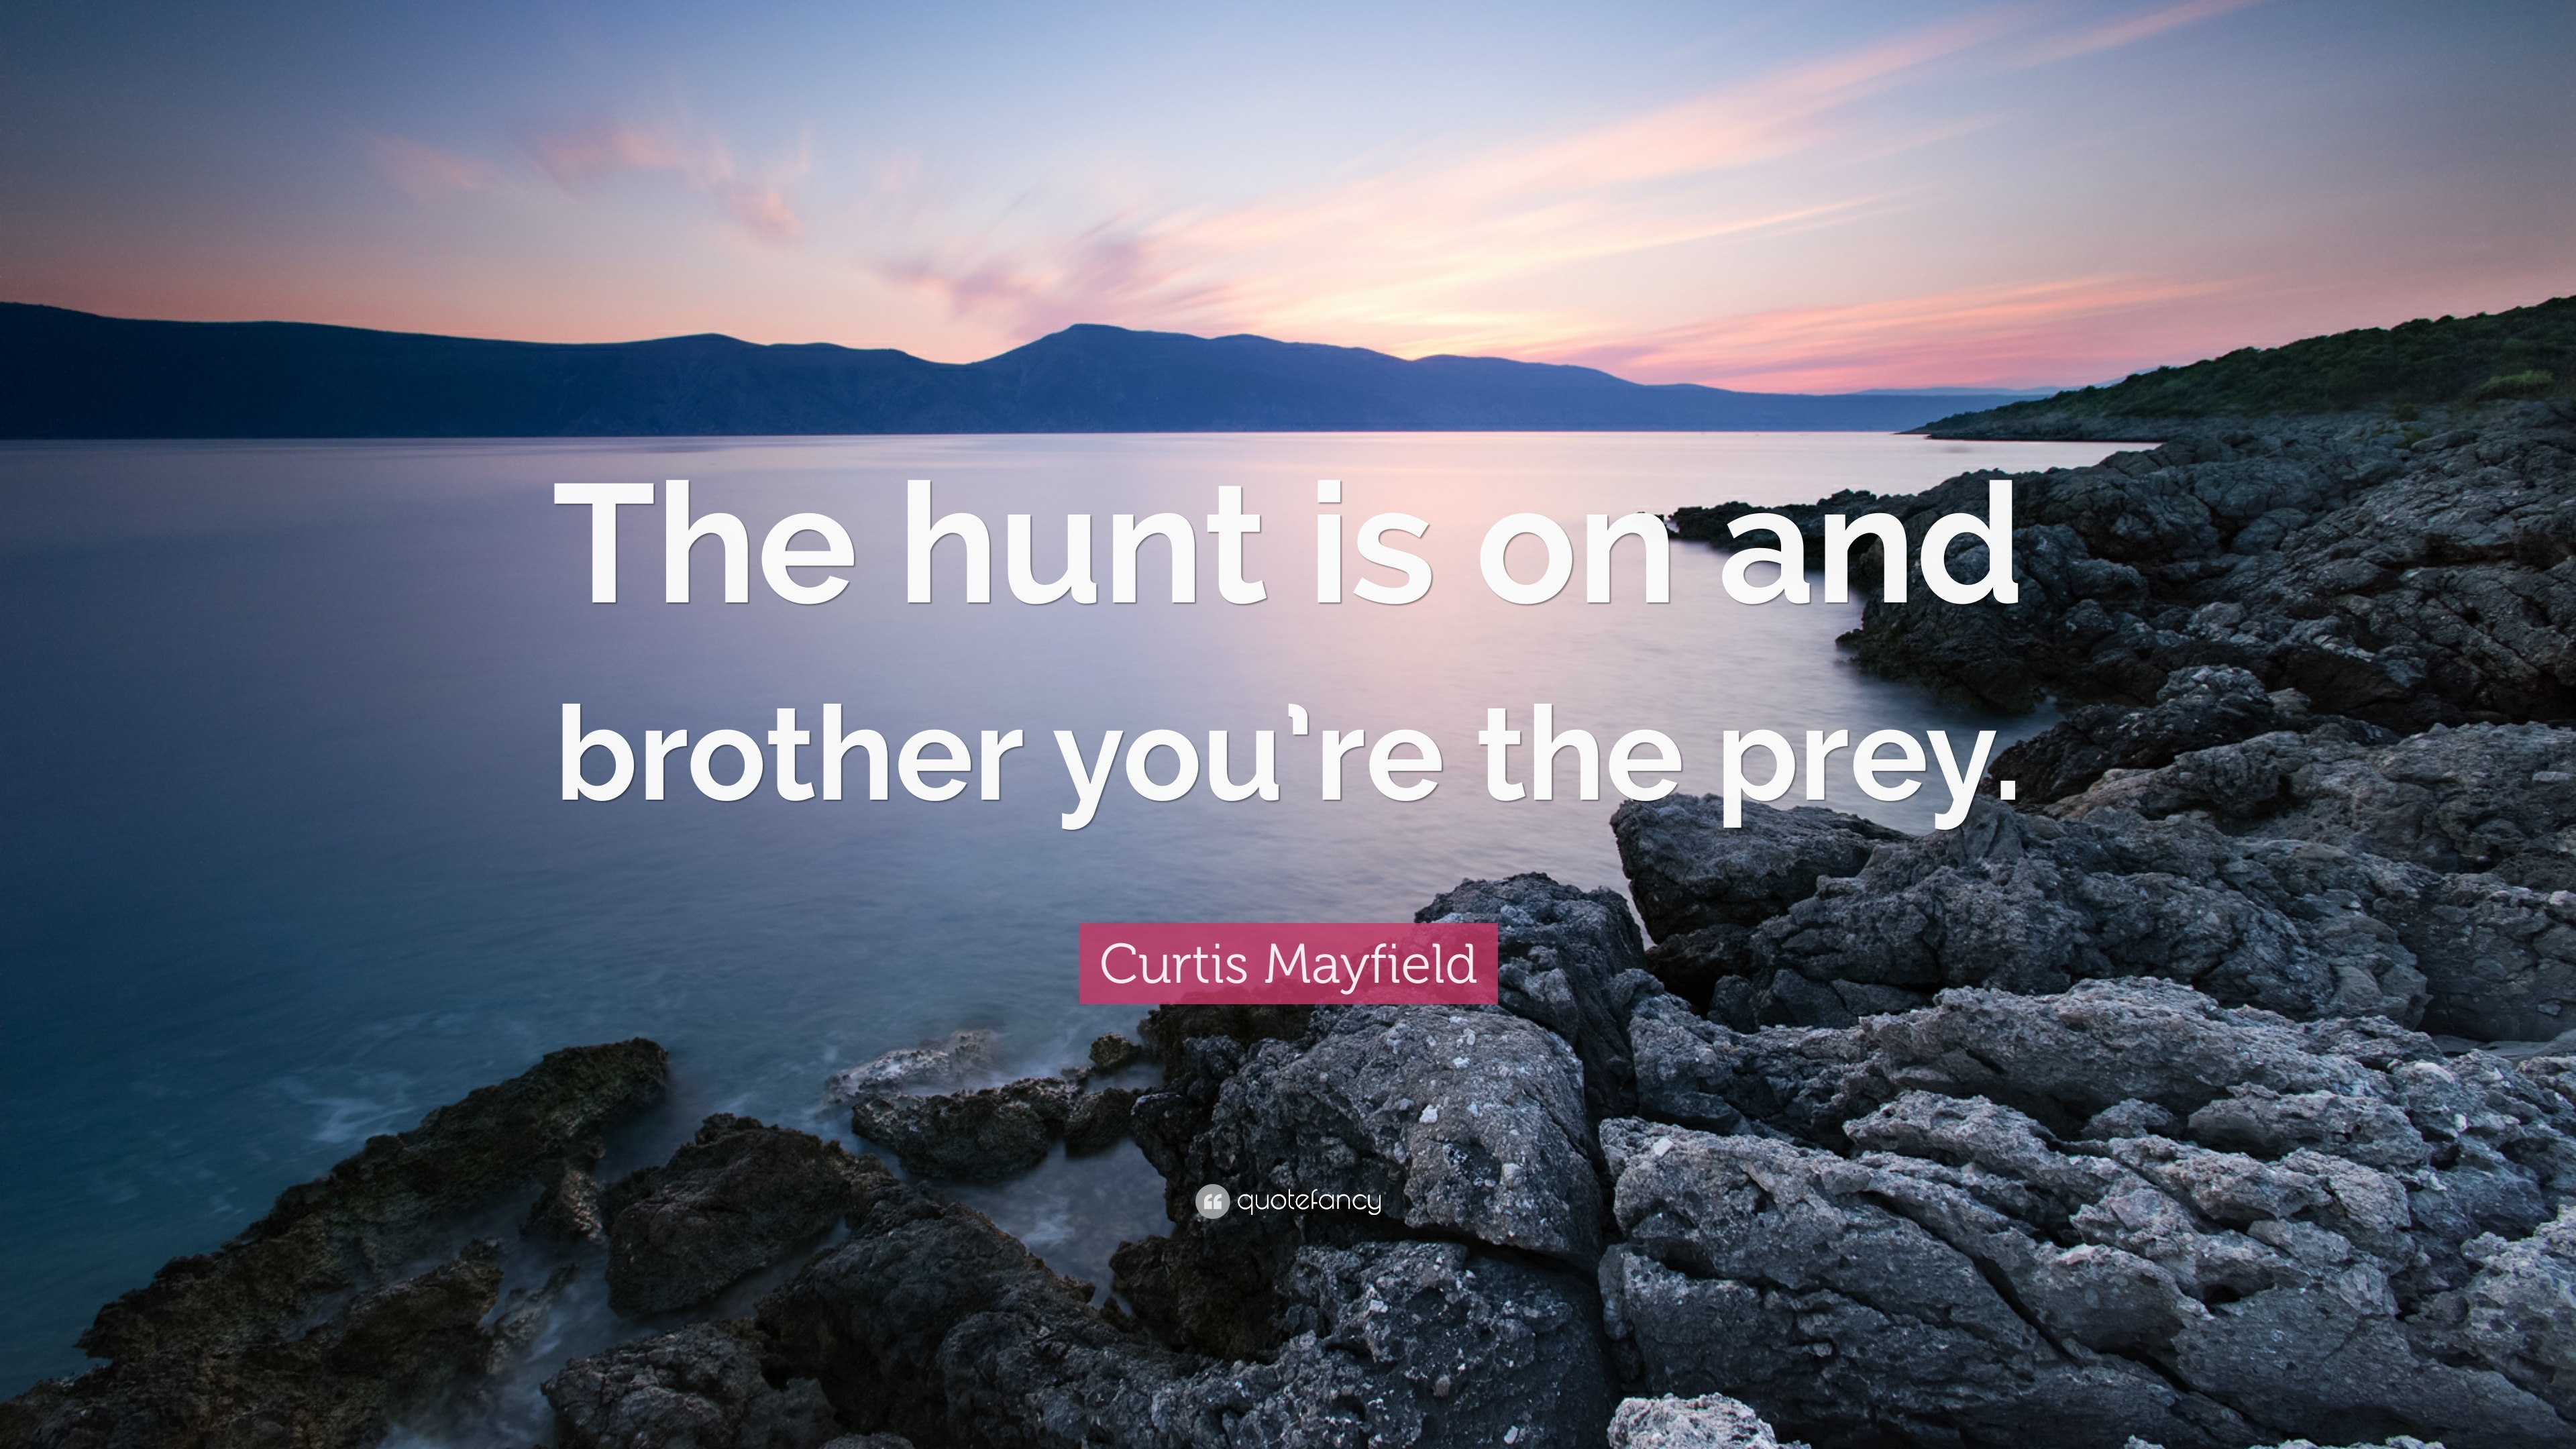 Download Curtis Mayfield Quote The Hunt Is On And Brother You Re The Prey